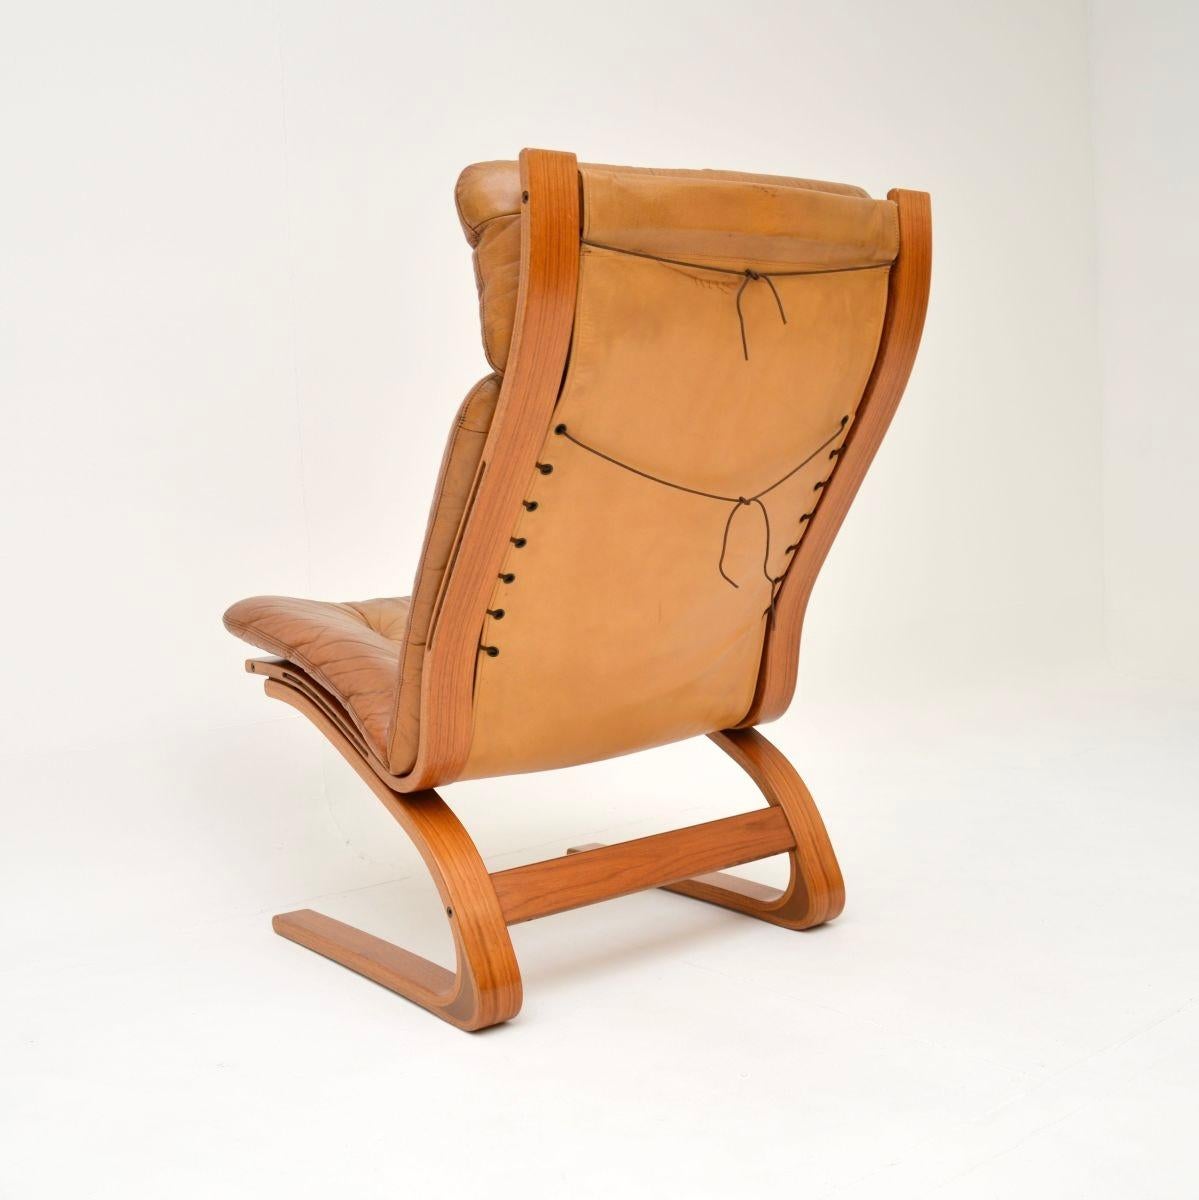 Vintage Leather Kengu Chair and Stool by Elsa and Nordahl Solheim for Rykken In Good Condition For Sale In London, GB